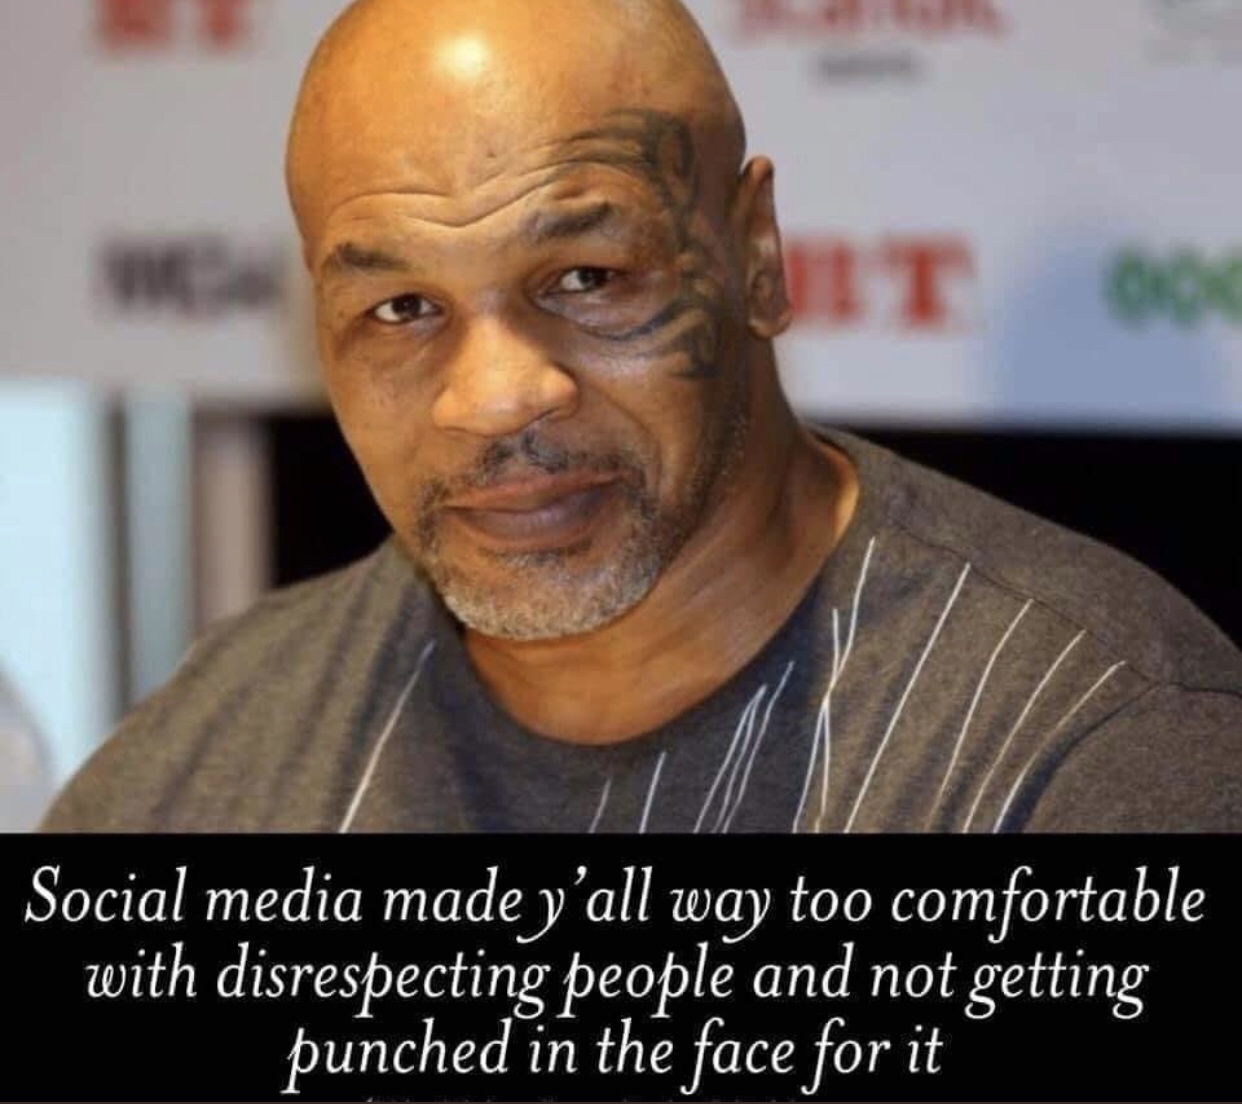 Social media made y'all way too comfortable with disrespecting people and not getting punched in the face for it